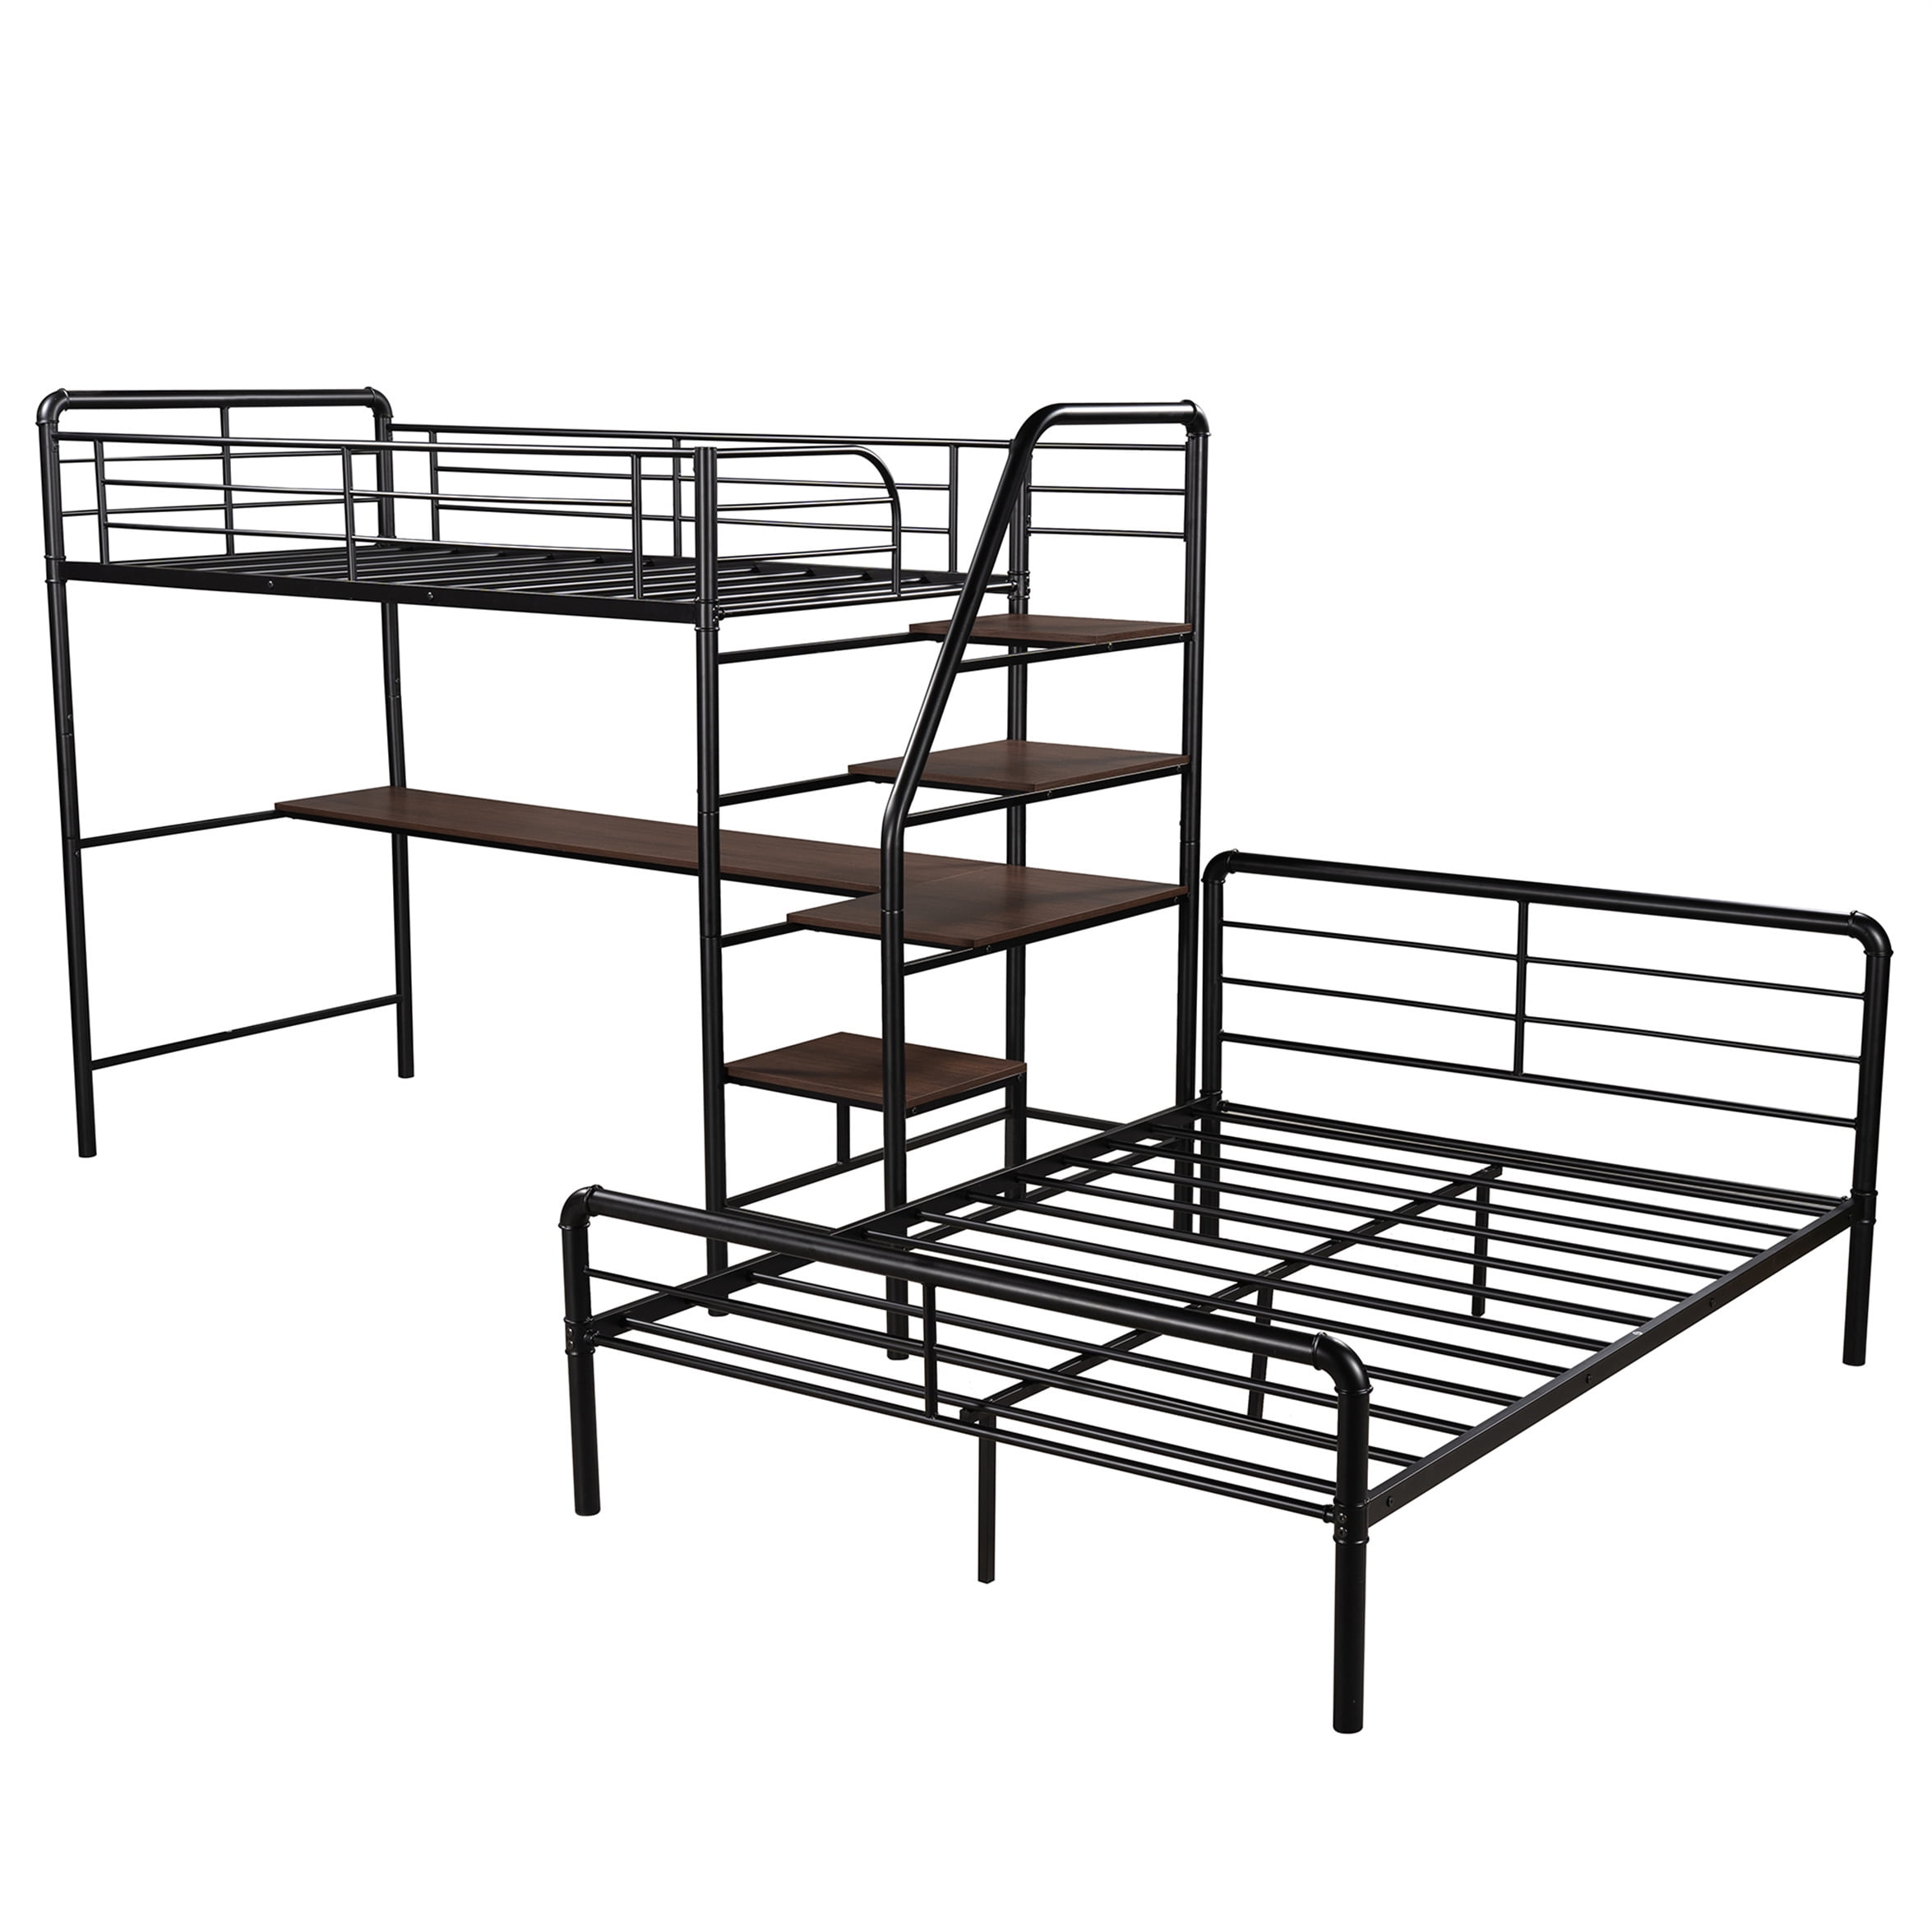 Aukfa Stairway Bunk Bed Twin Over Full Metal Bed Frame Convertible To Twin Loft Bed And Full Size Platform Bed Black Walmart Com